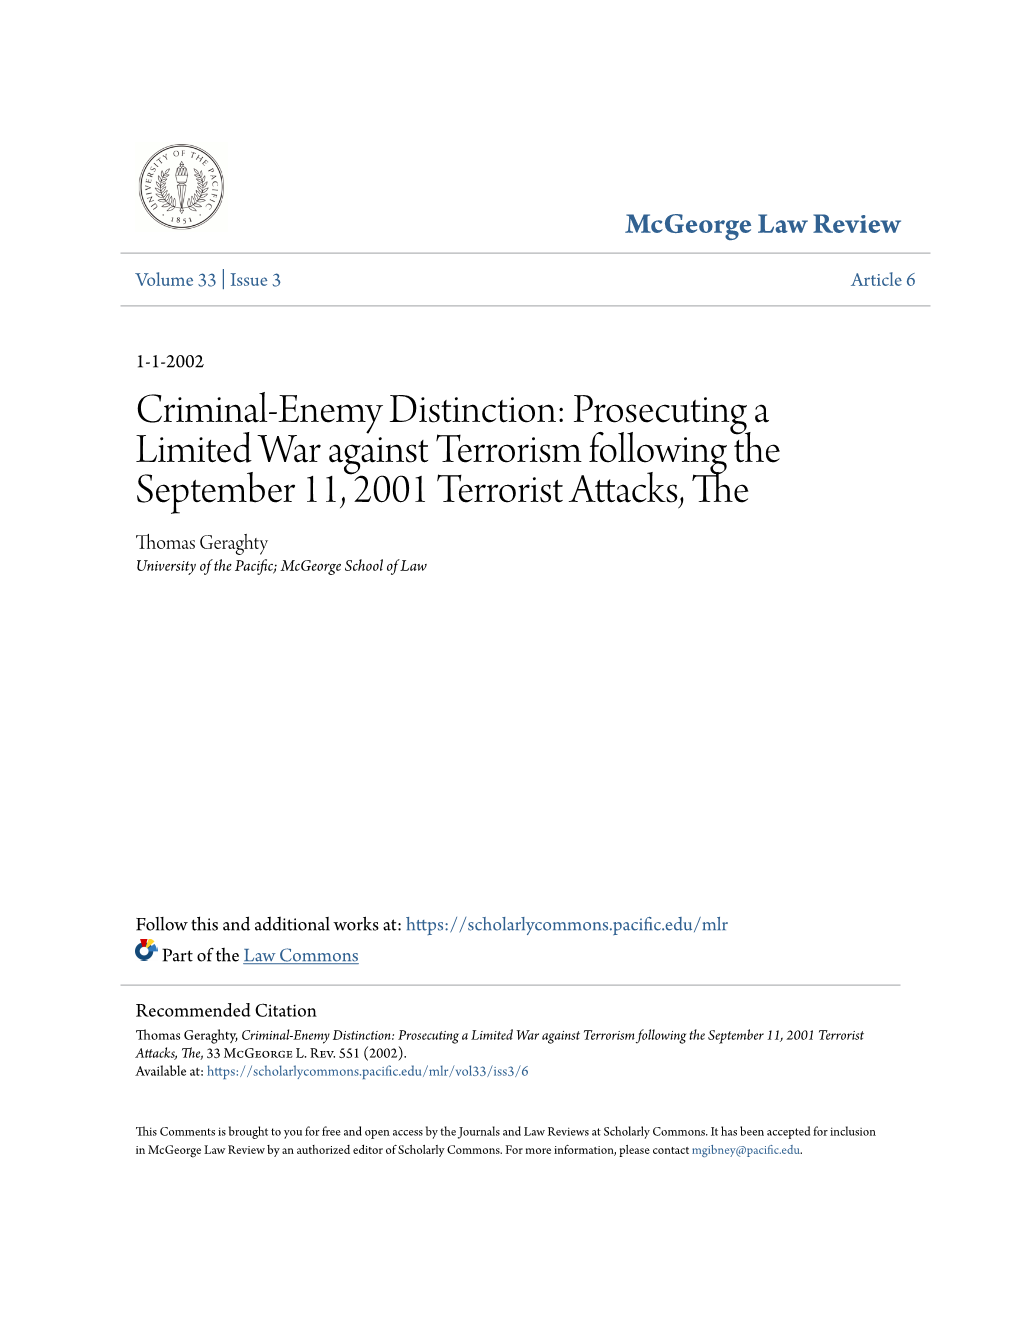 Prosecuting a Limited War Against Terrorism Following the September 11, 2001 Terrorist Attacks, the Thomas Geraghty University of the Pacific; Cgem Orge School of Law